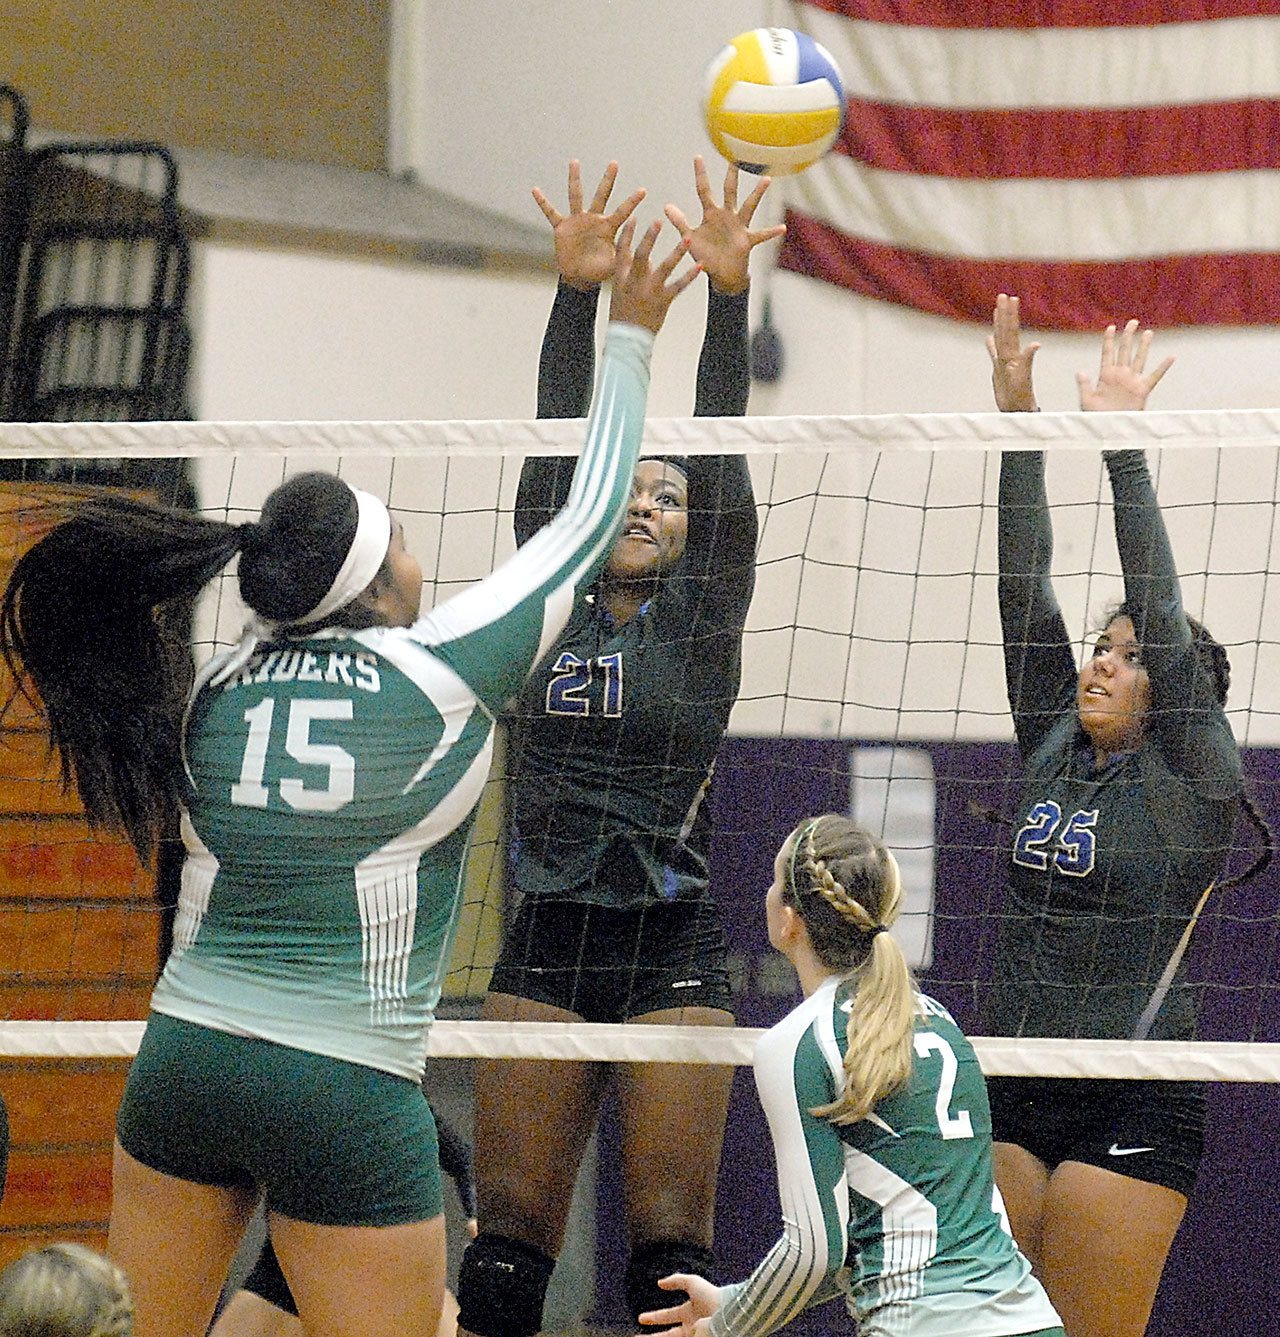 Keith Thorpe/Peninsula Daily News Port Angeles’ Nizhoni Wheeler, left, tips the ball across the net as Sequim’s Adrienne Haggerty and Kaila Sundquist try to block during the second game of their match on Thursday night in Sequim. Looking on at the net was Port Angeles’ Callie Hall.